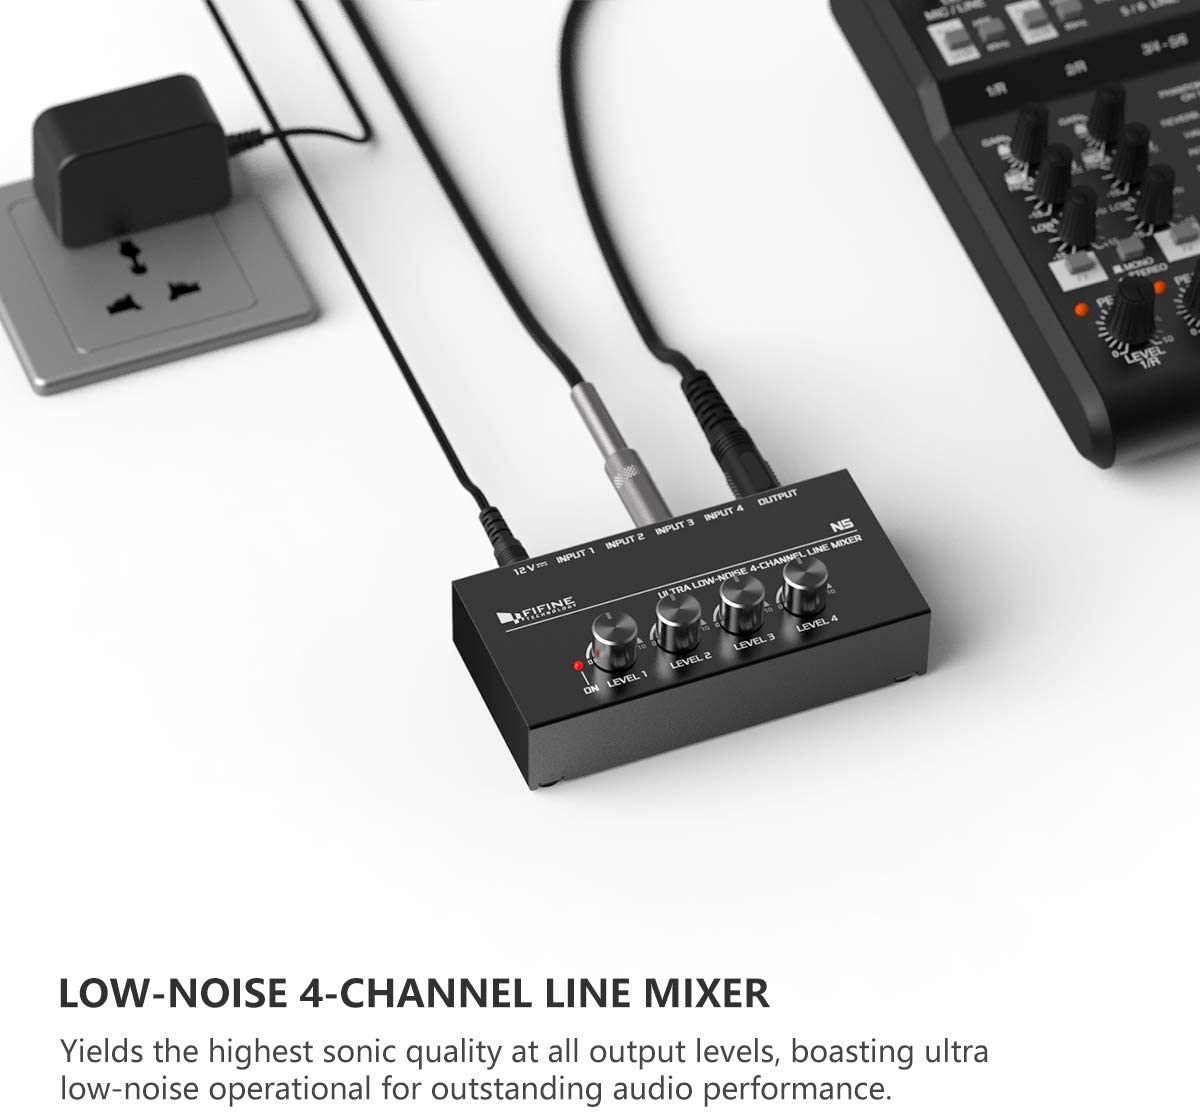 FIFINE N5 4 CHANNEL LINE MIXER WITH AC ADAPTOR, FIFINE, MIXER, fifine-mixer-fif-n5, ZOSO MUSIC SDN BHD